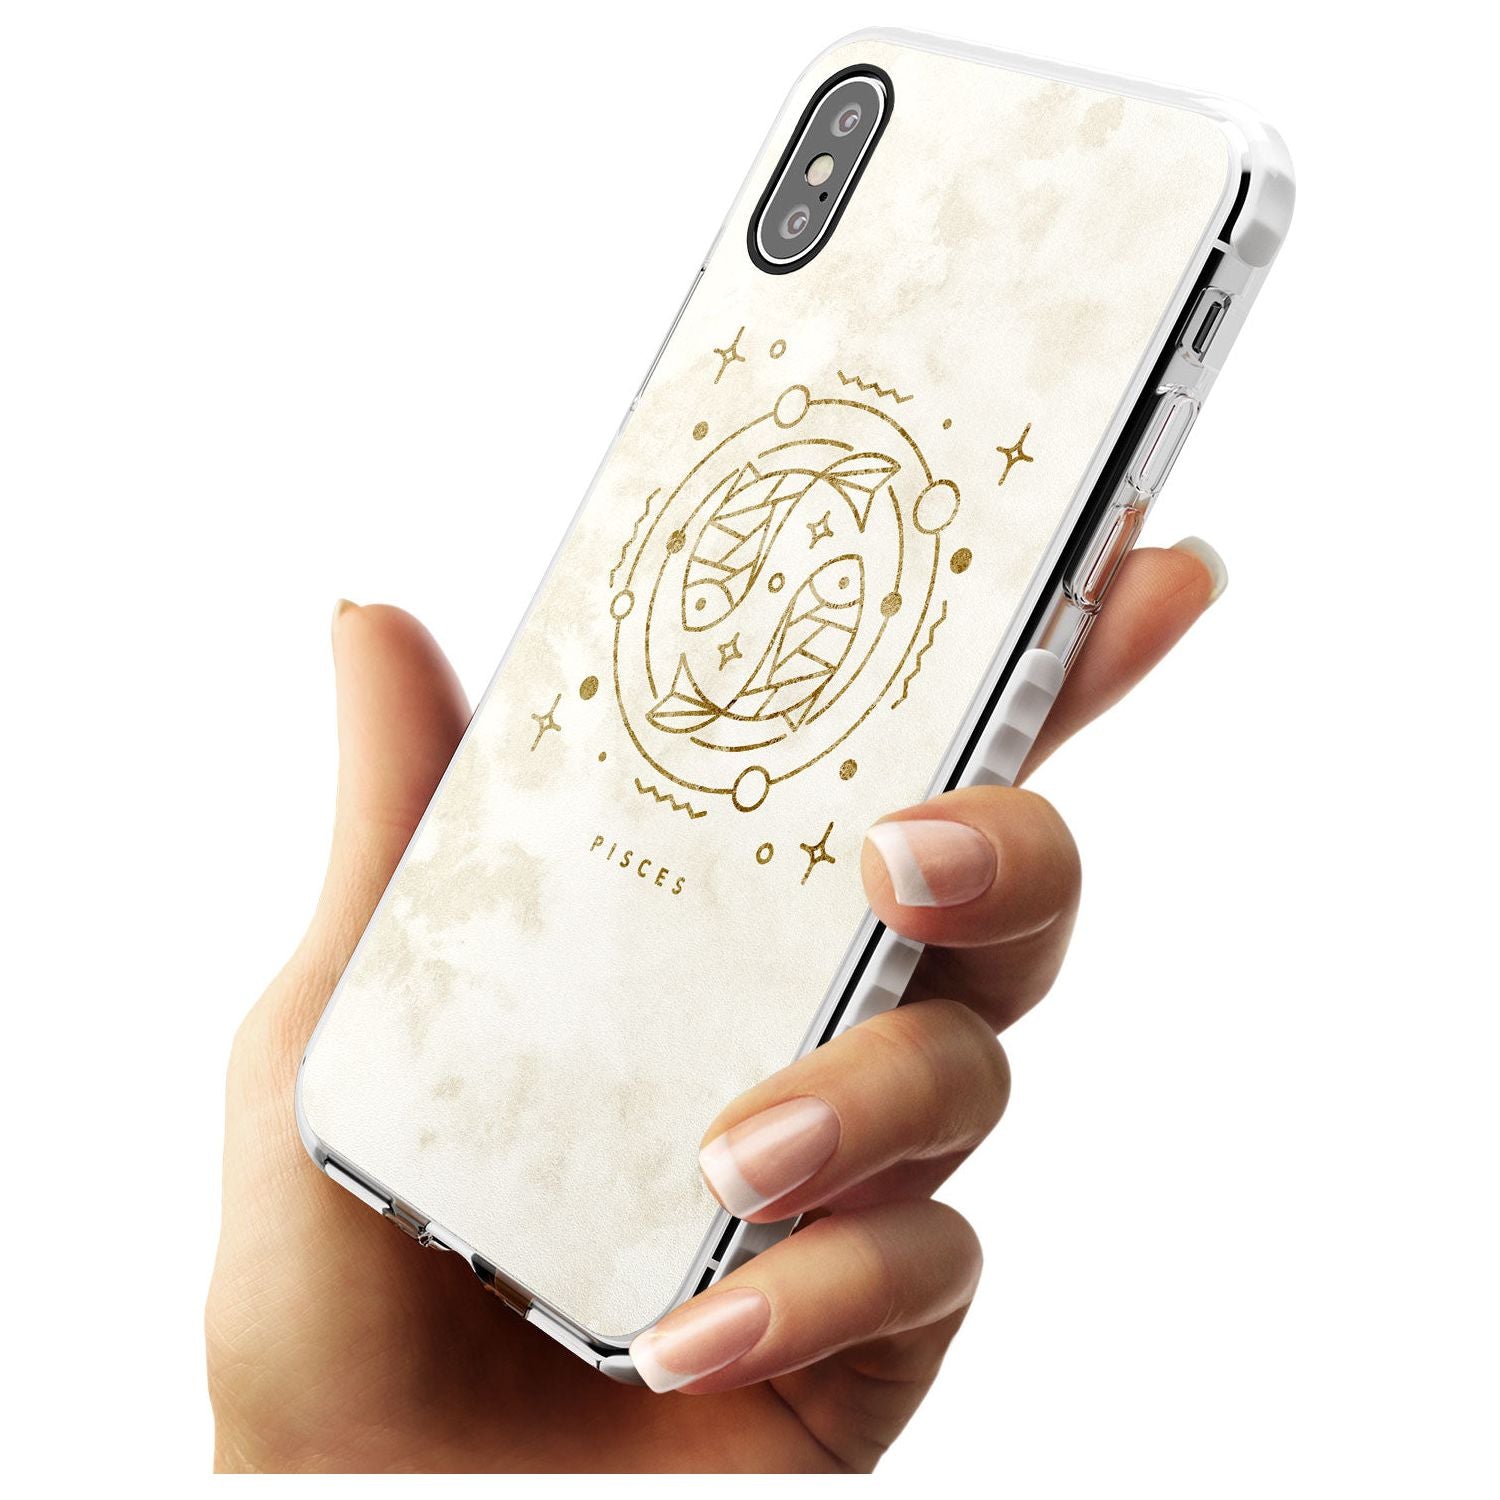 Pisces Emblem - Solid Gold Marbled Design Impact Phone Case for iPhone X XS Max XR